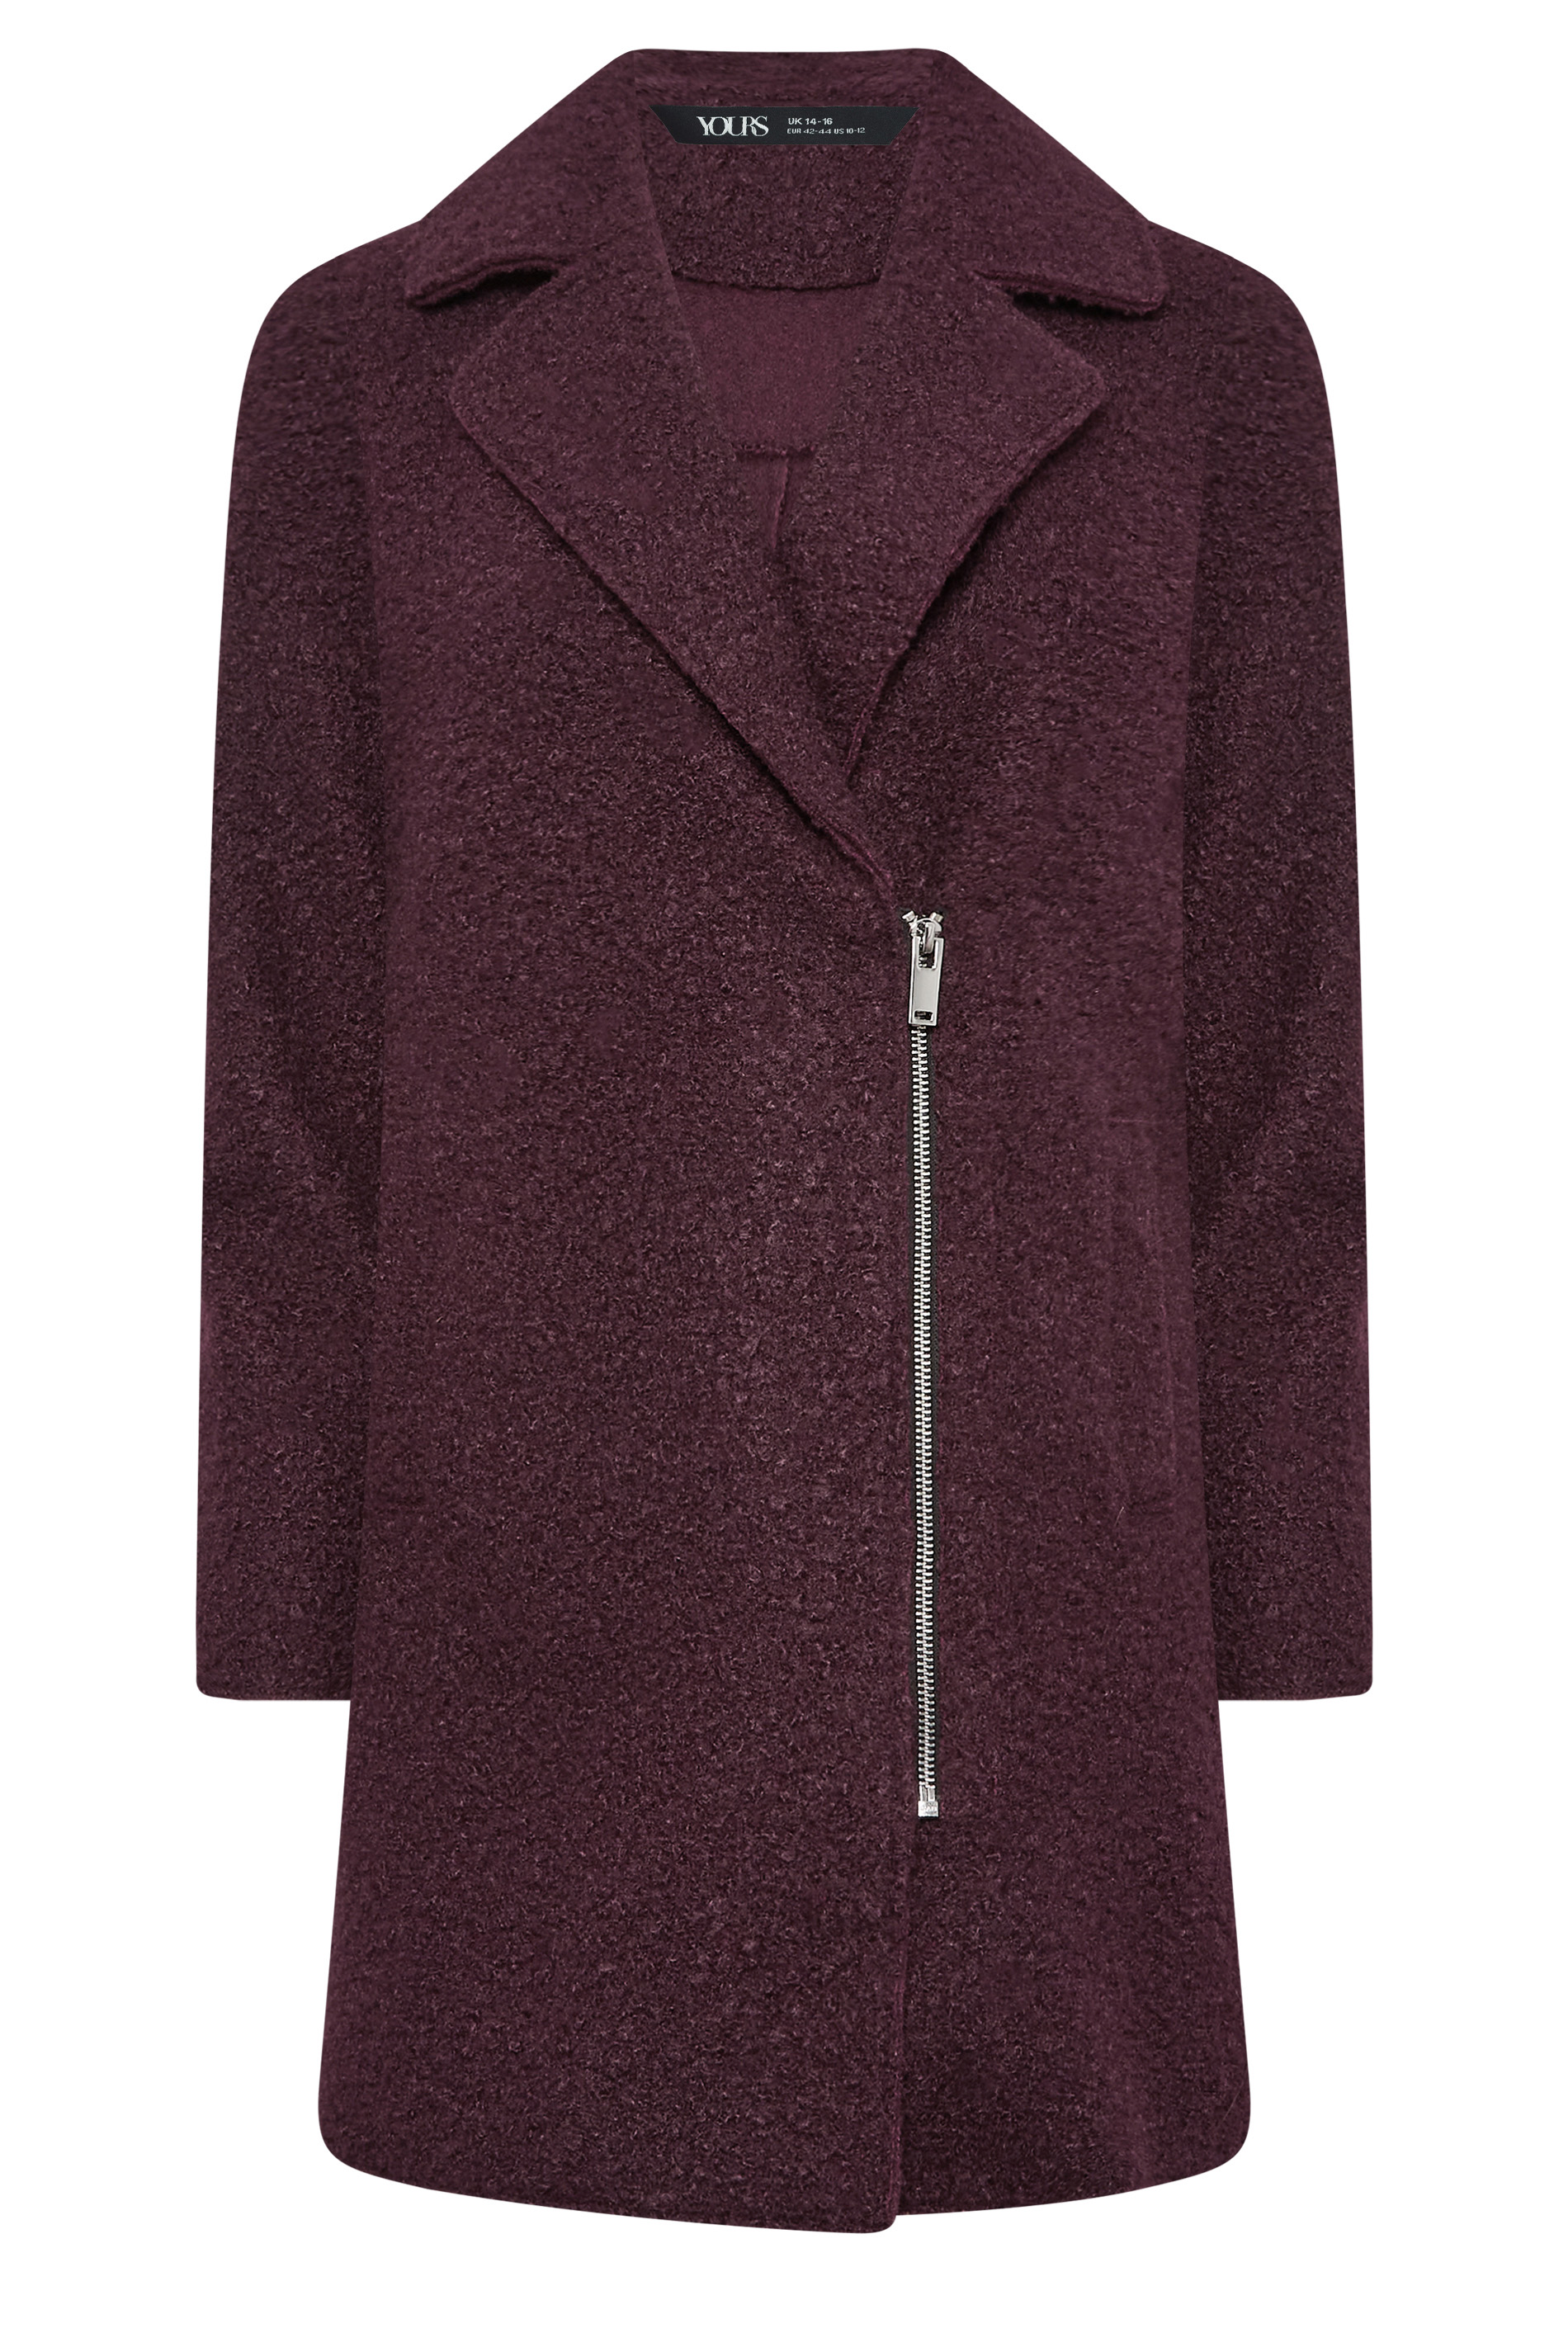 YOURS PETITE Curve Berry Red Boucle Formal Coat | Yours Clothing 1